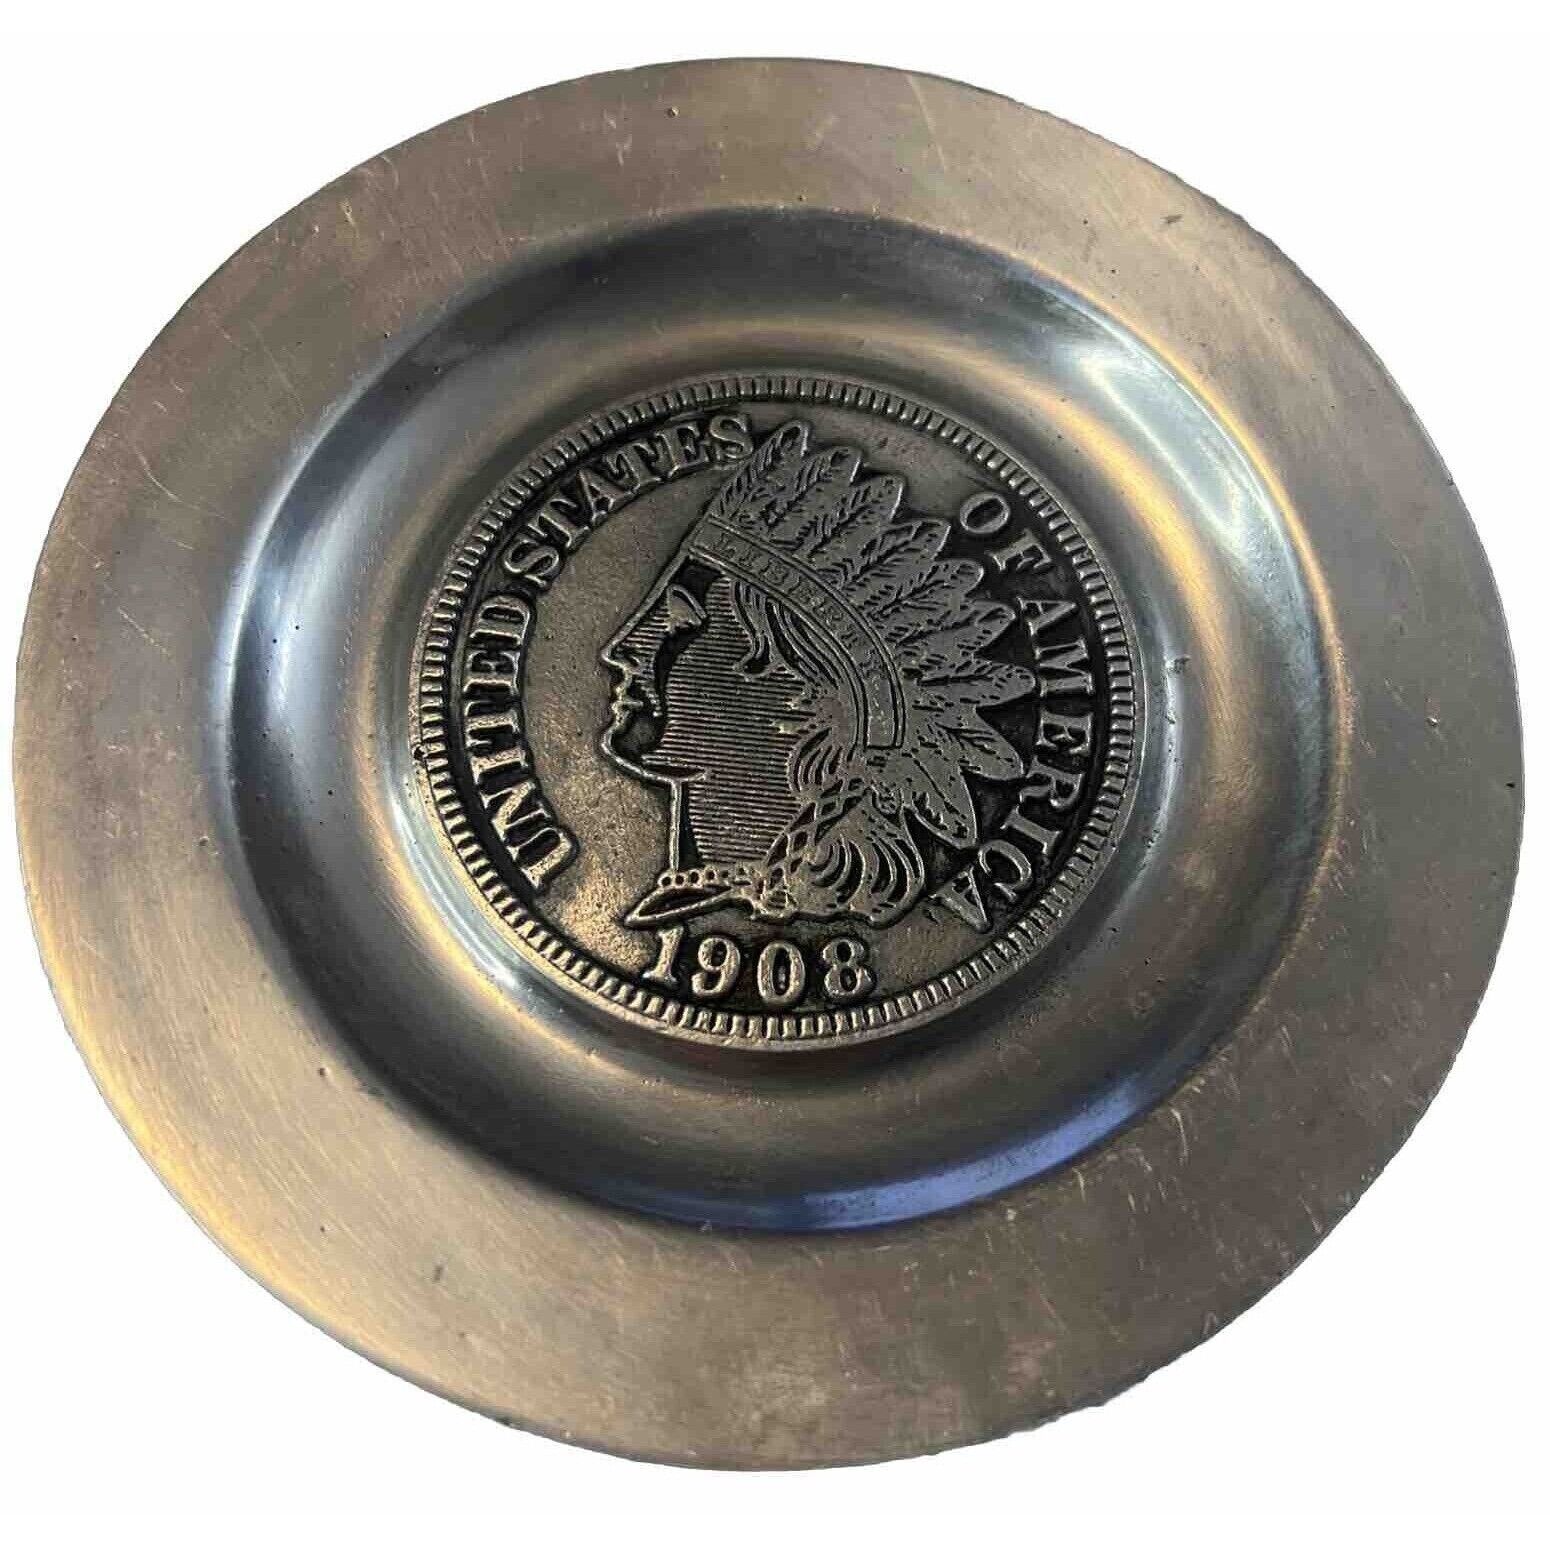 Vintage United States 1908 Indian Head Pewter Coin Dish PEW-TA-REX A02-02